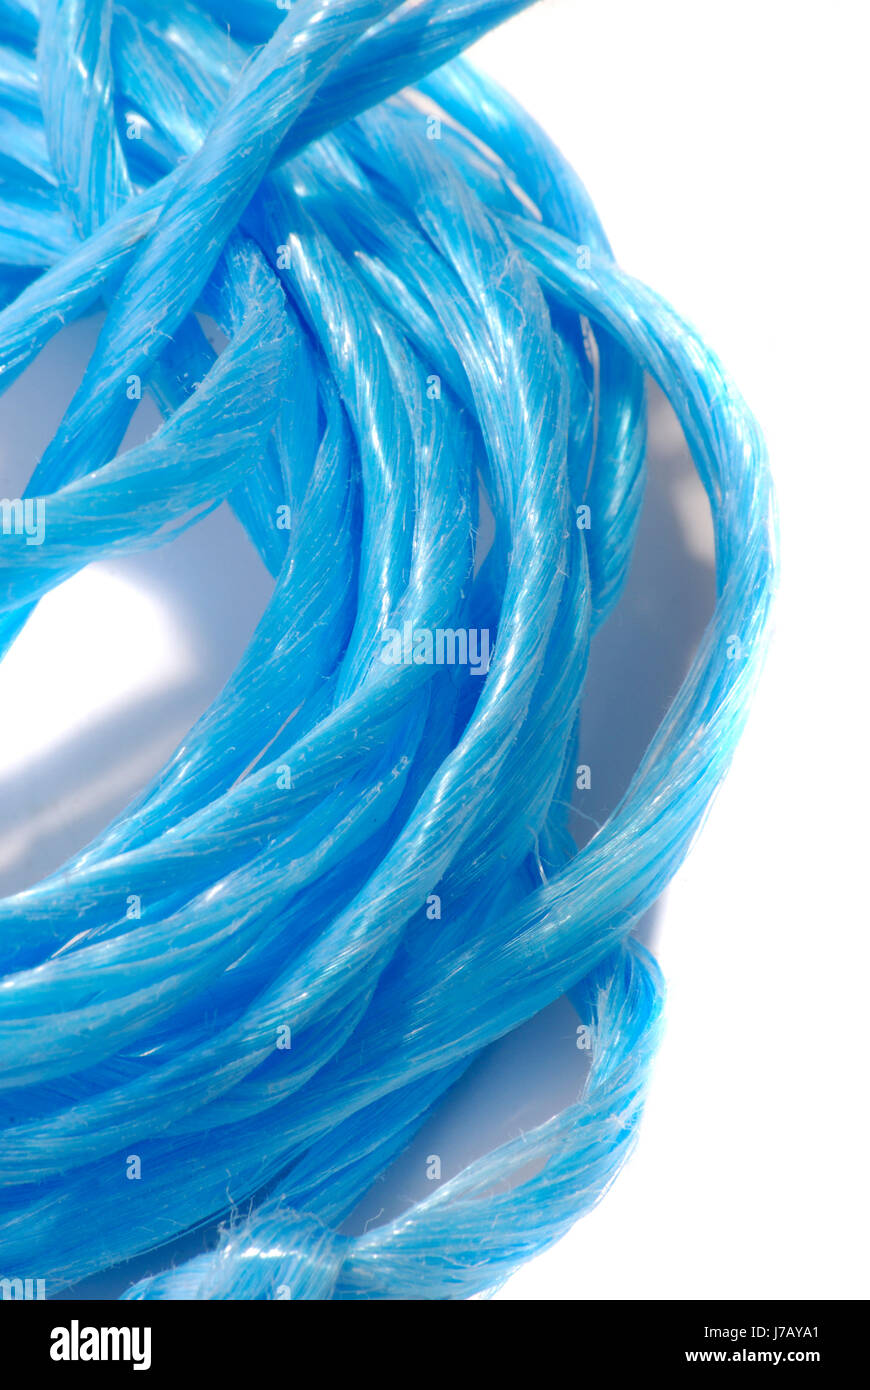 blue household dew cord unrolled rope twine string blue macro close-up macro Stock Photo